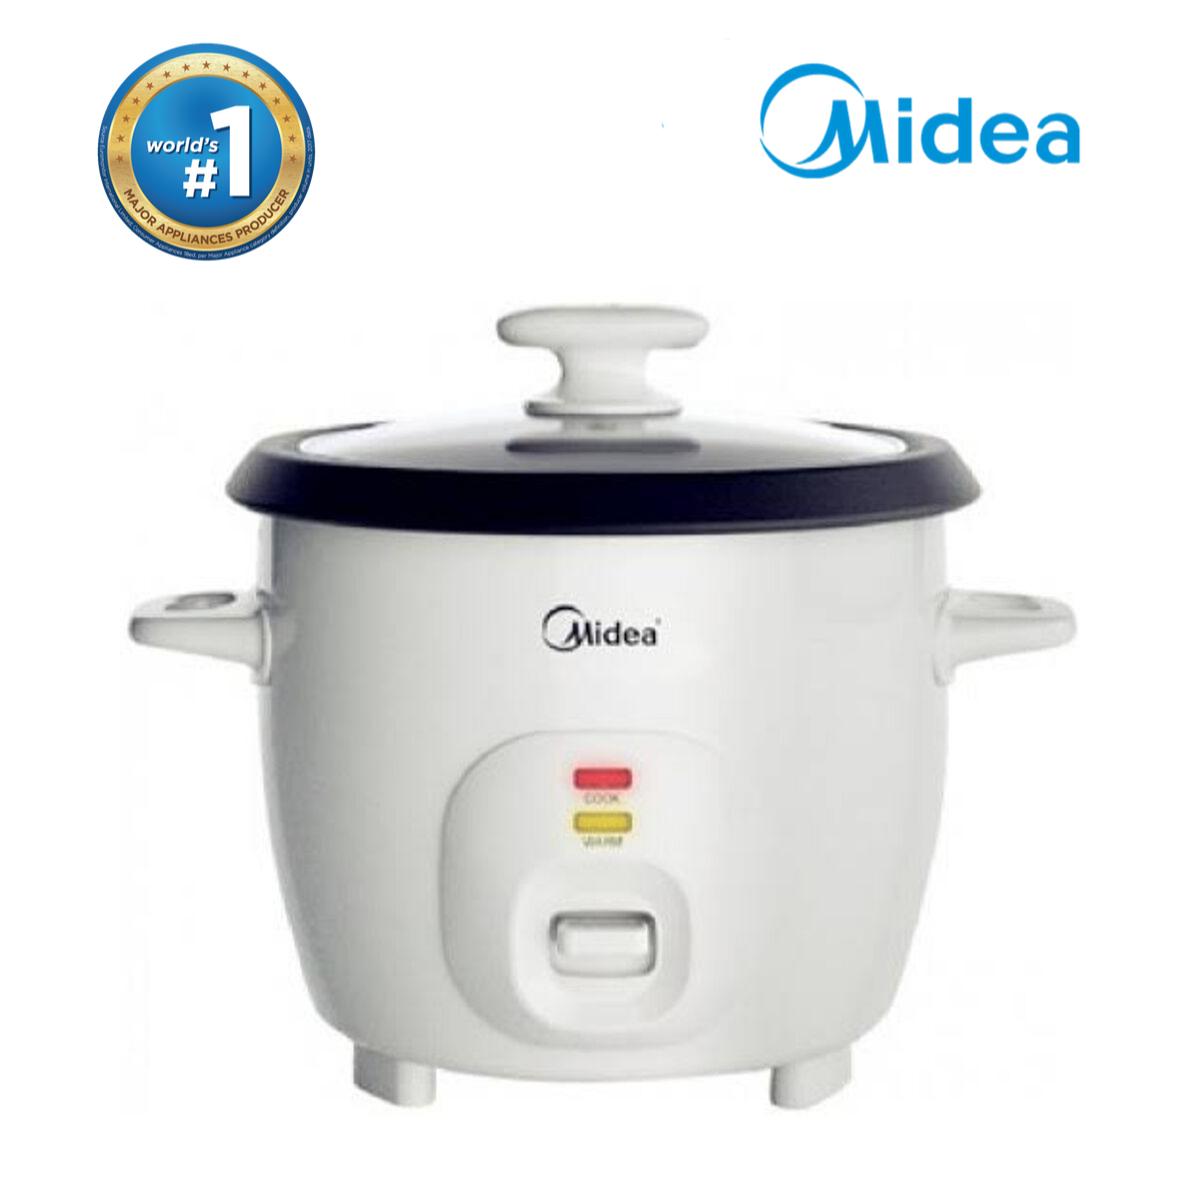 rice cooker ratings